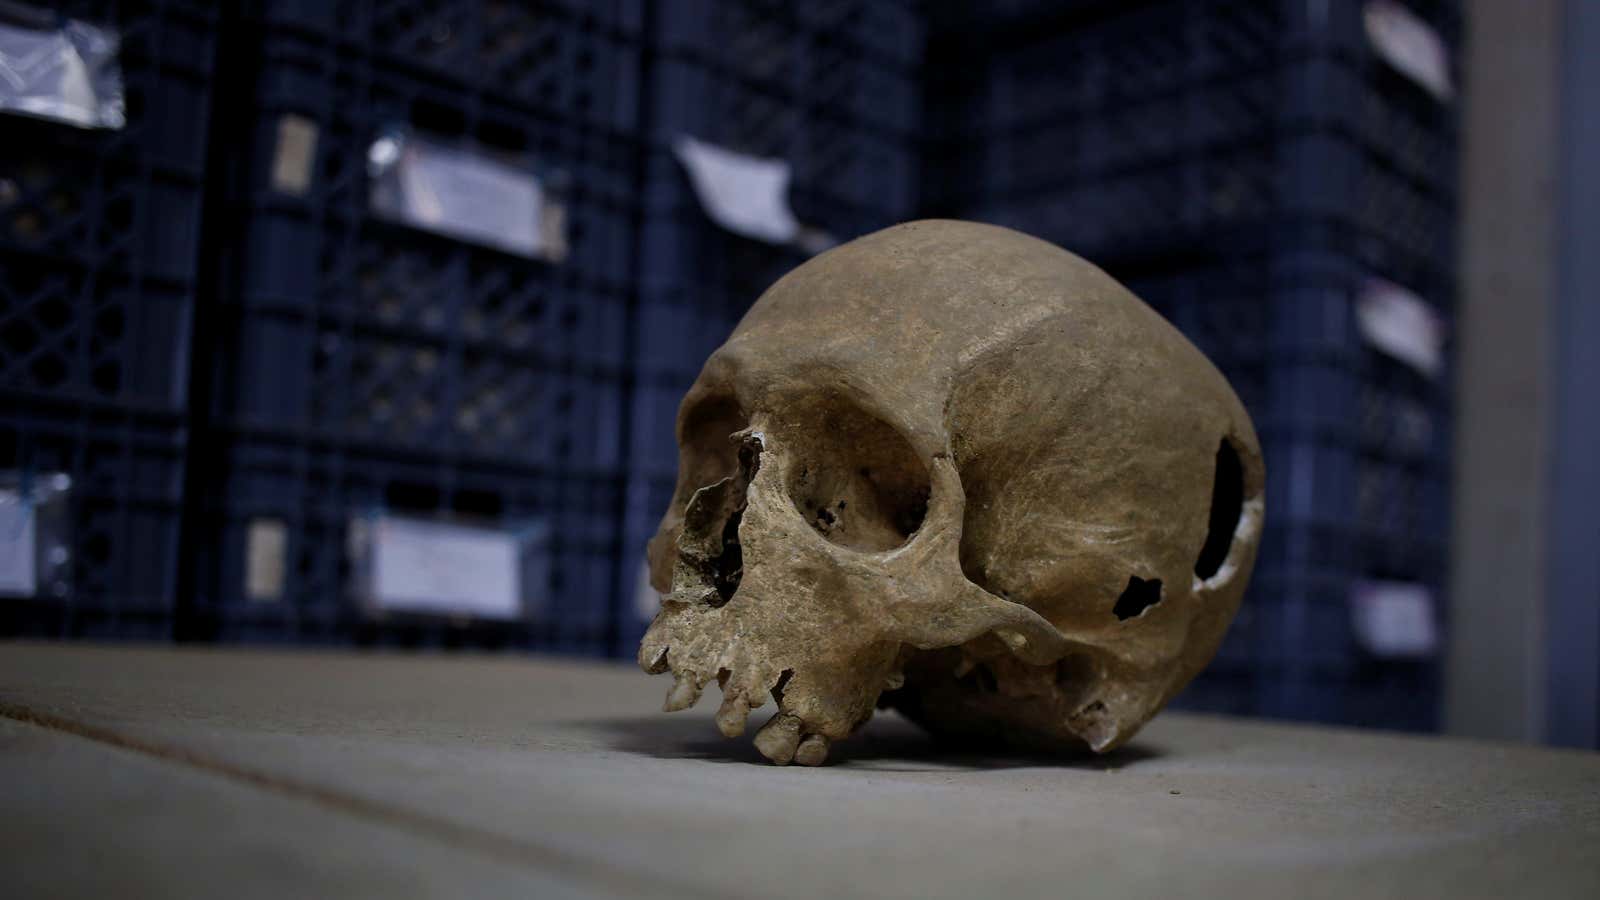 What can the oldest African burial site tell us about our ancestors?